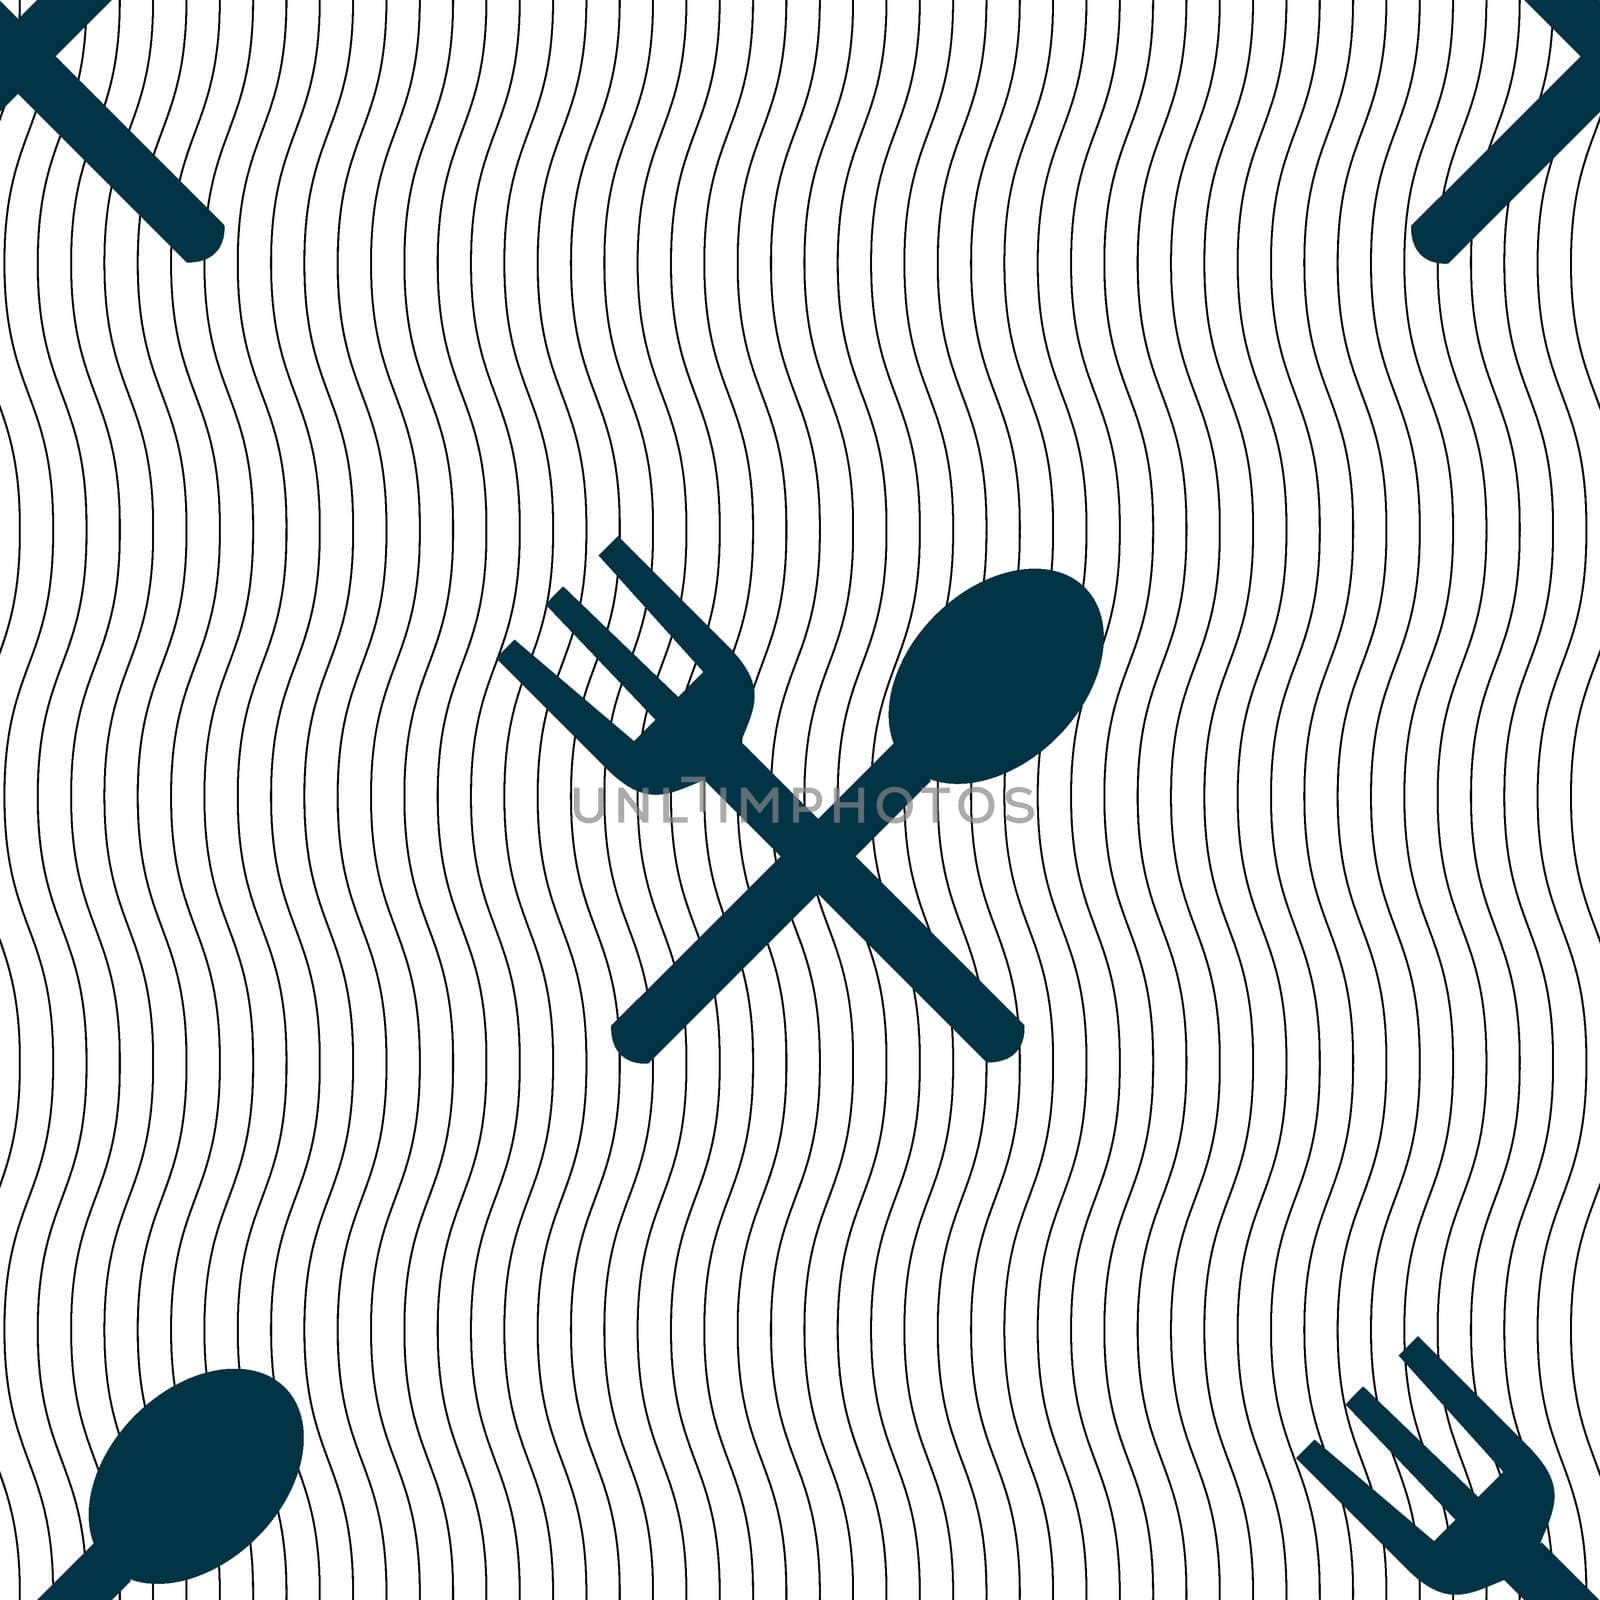 Fork and spoon crosswise, Cutlery, Eat icon sign. Seamless pattern with geometric texture.  by serhii_lohvyniuk